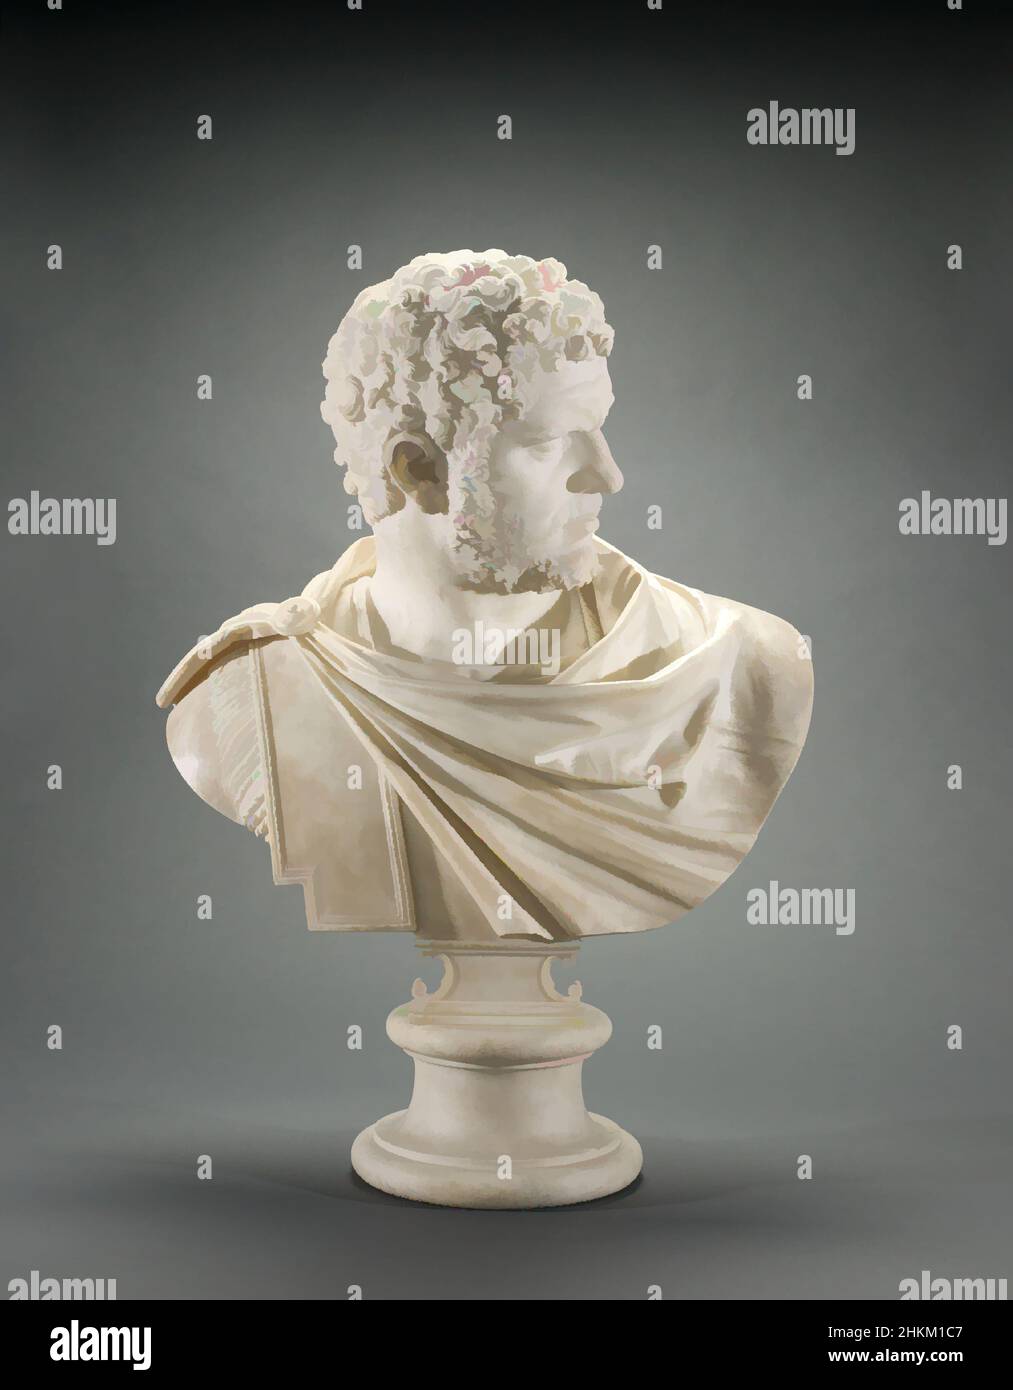 Art inspired by Bust of Emperor Caracalla, Joseph Claus, German, 1718-1788,  1757, Marble, Rome, Lazio, Italy, Europe, Sculpture, 28 3/4 x 20 x 8 in.  (73 x 50.8 x 20.3 cm, Classic